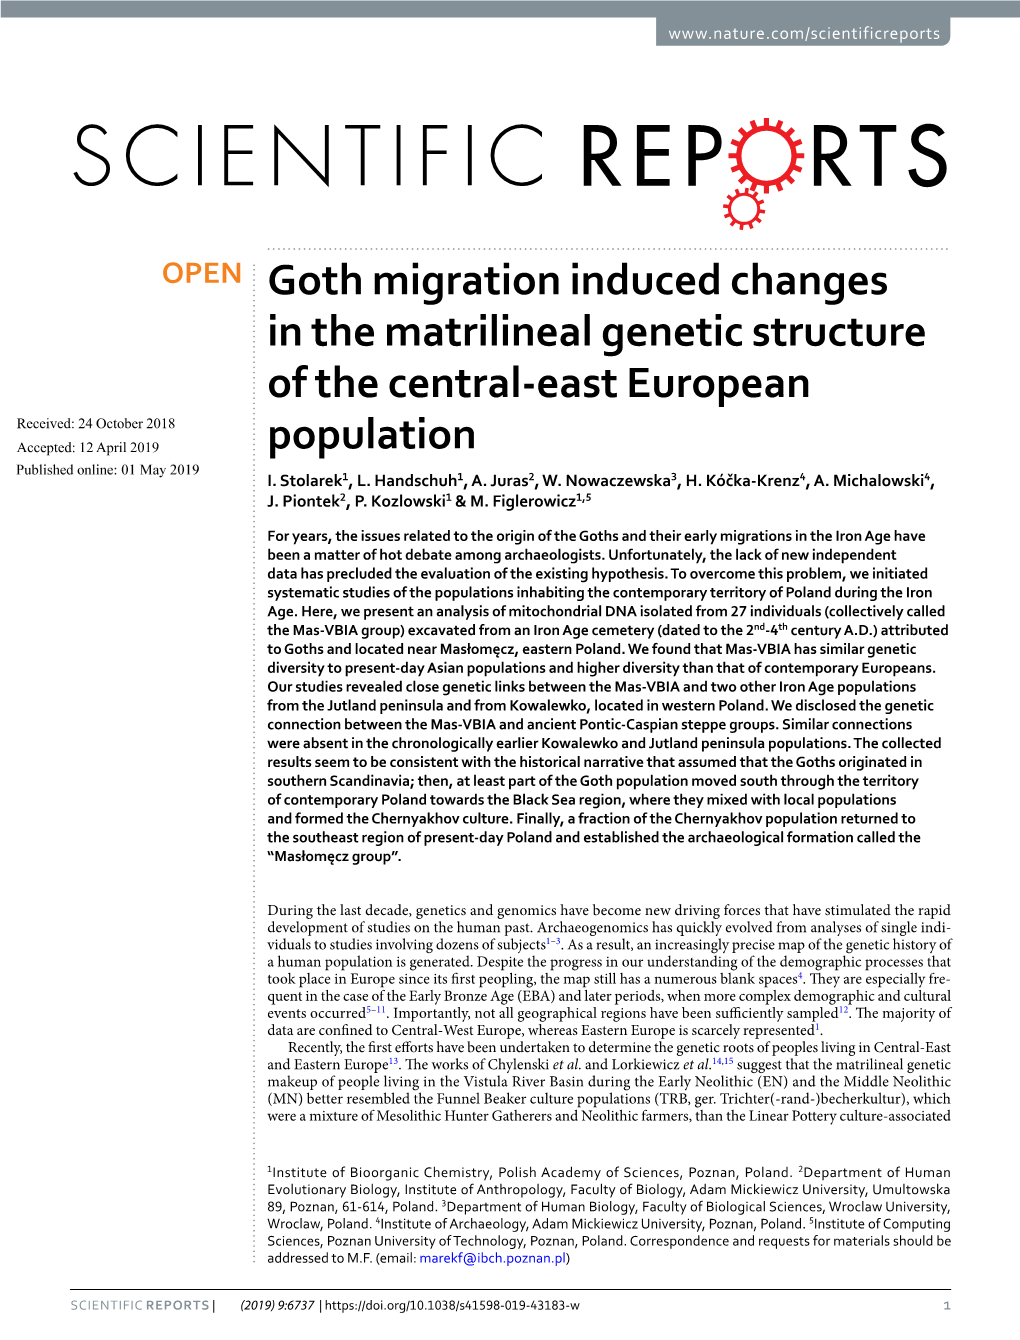 Goth Migration Induced Changes in the Matrilineal Genetic Structure Of